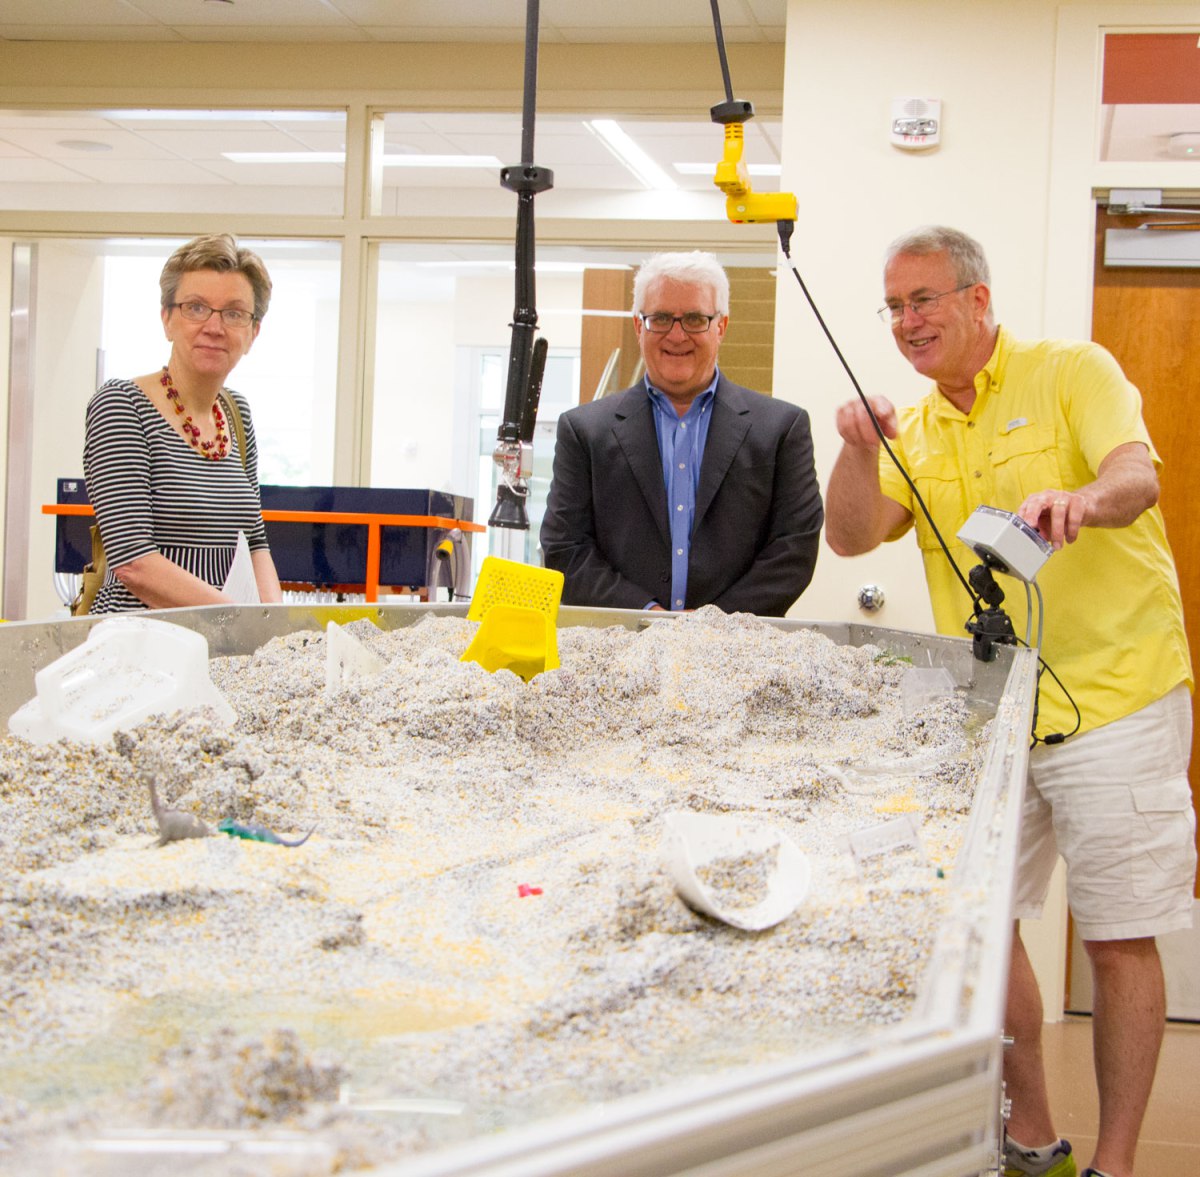 Associate professor John Schneider, right, explains how watersheds are studied during a tour of Metropolitan State University’s Science Education Center for editorial board member Pat Effenberger and editor Mike Burbach of the Saint Paul Pioneer Press. Effenberger and Burbach visited the Saint Paul Campus to meet with incoming President Ginny Arthur, June 16, 2016.